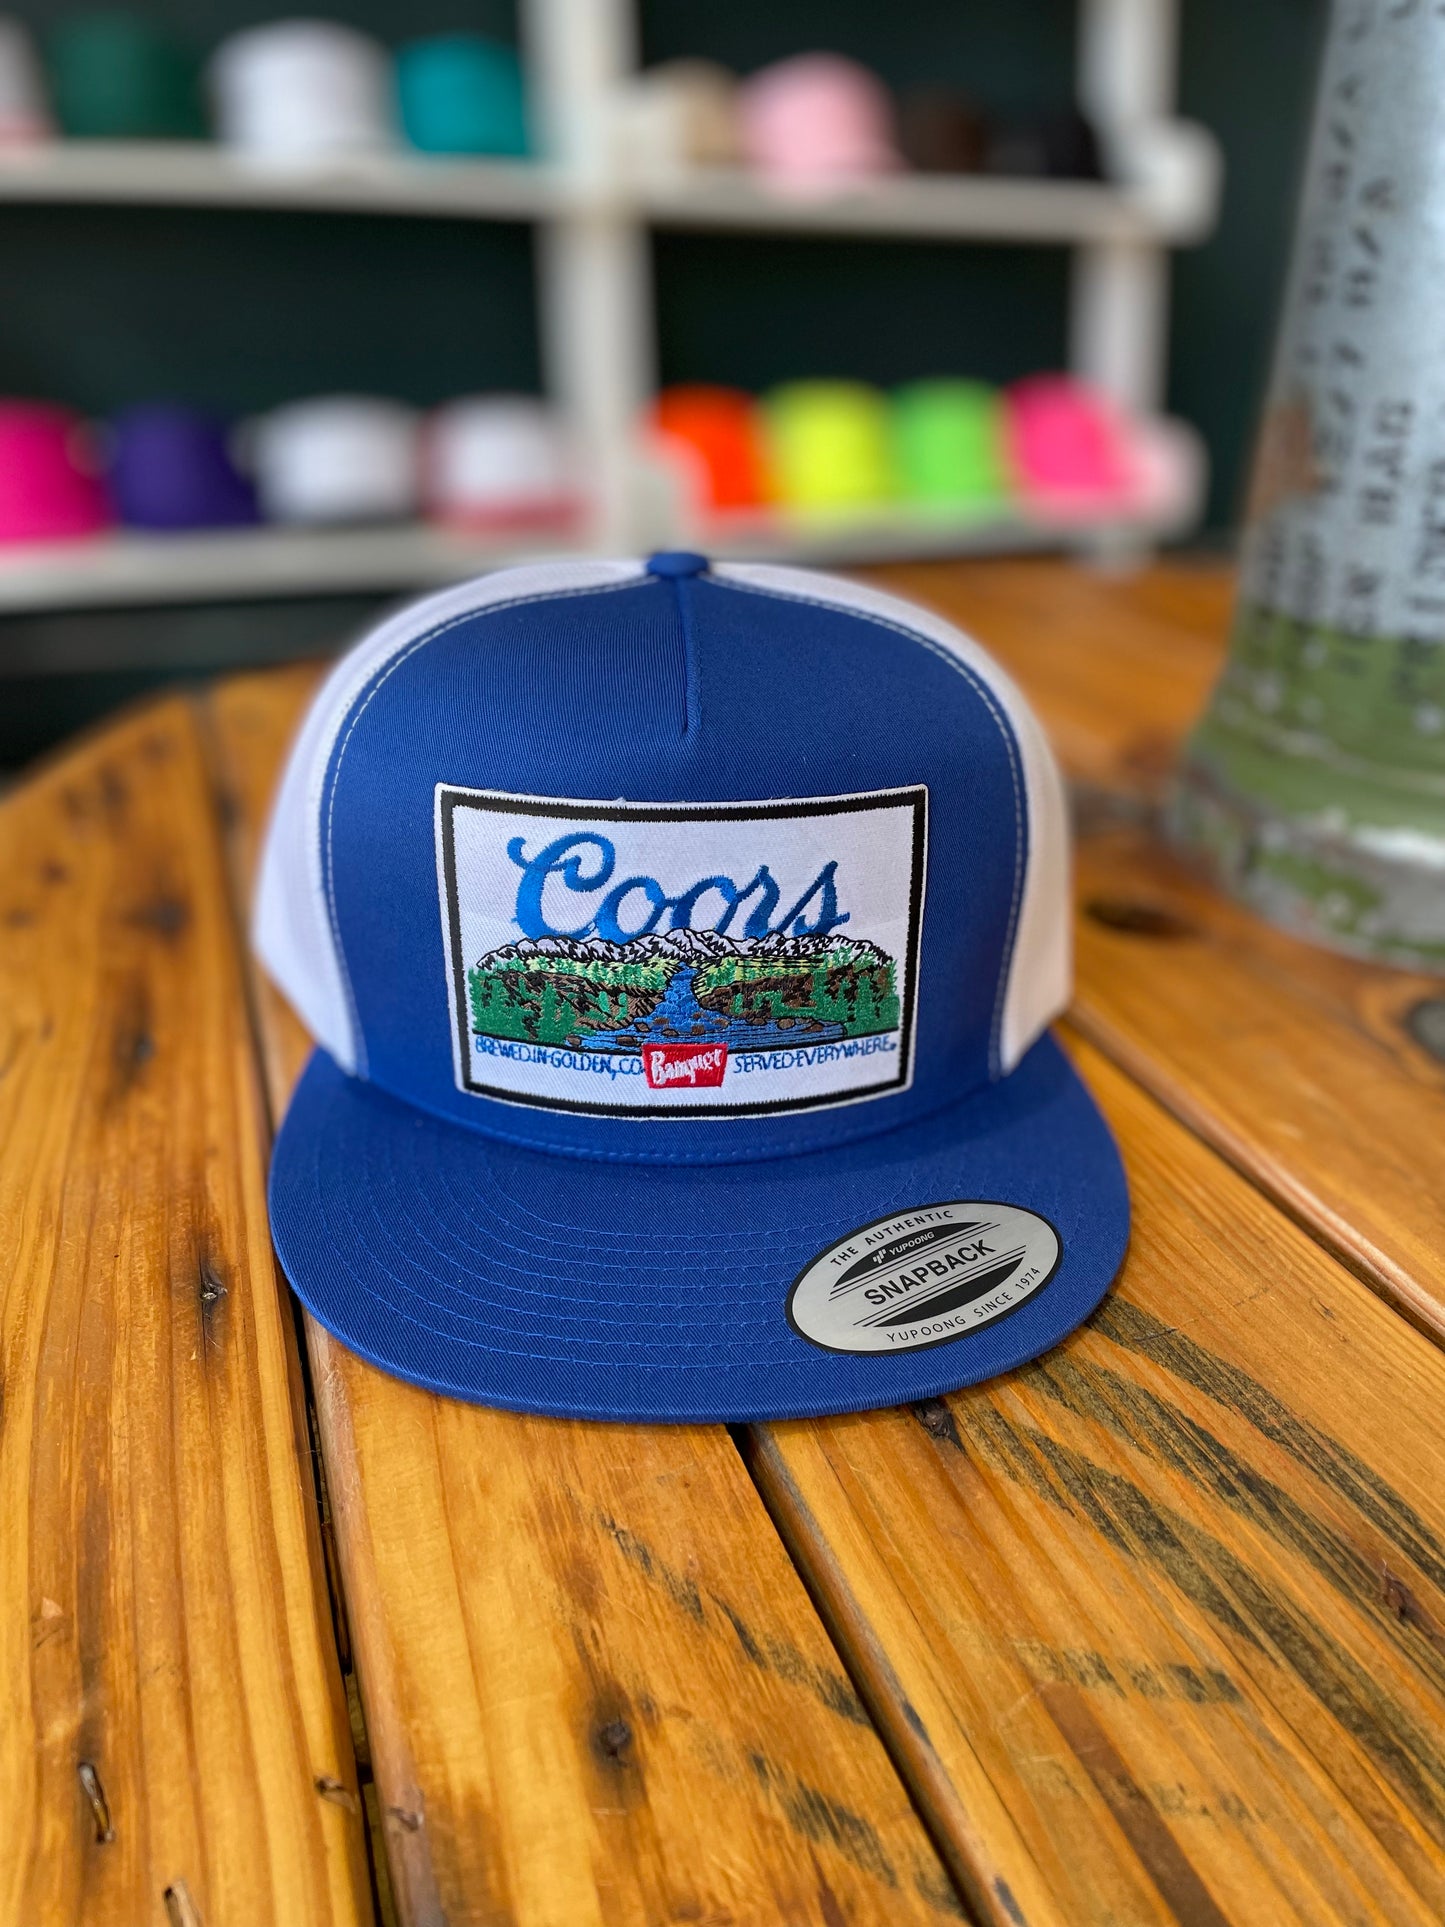 The Coors Banquet Hat